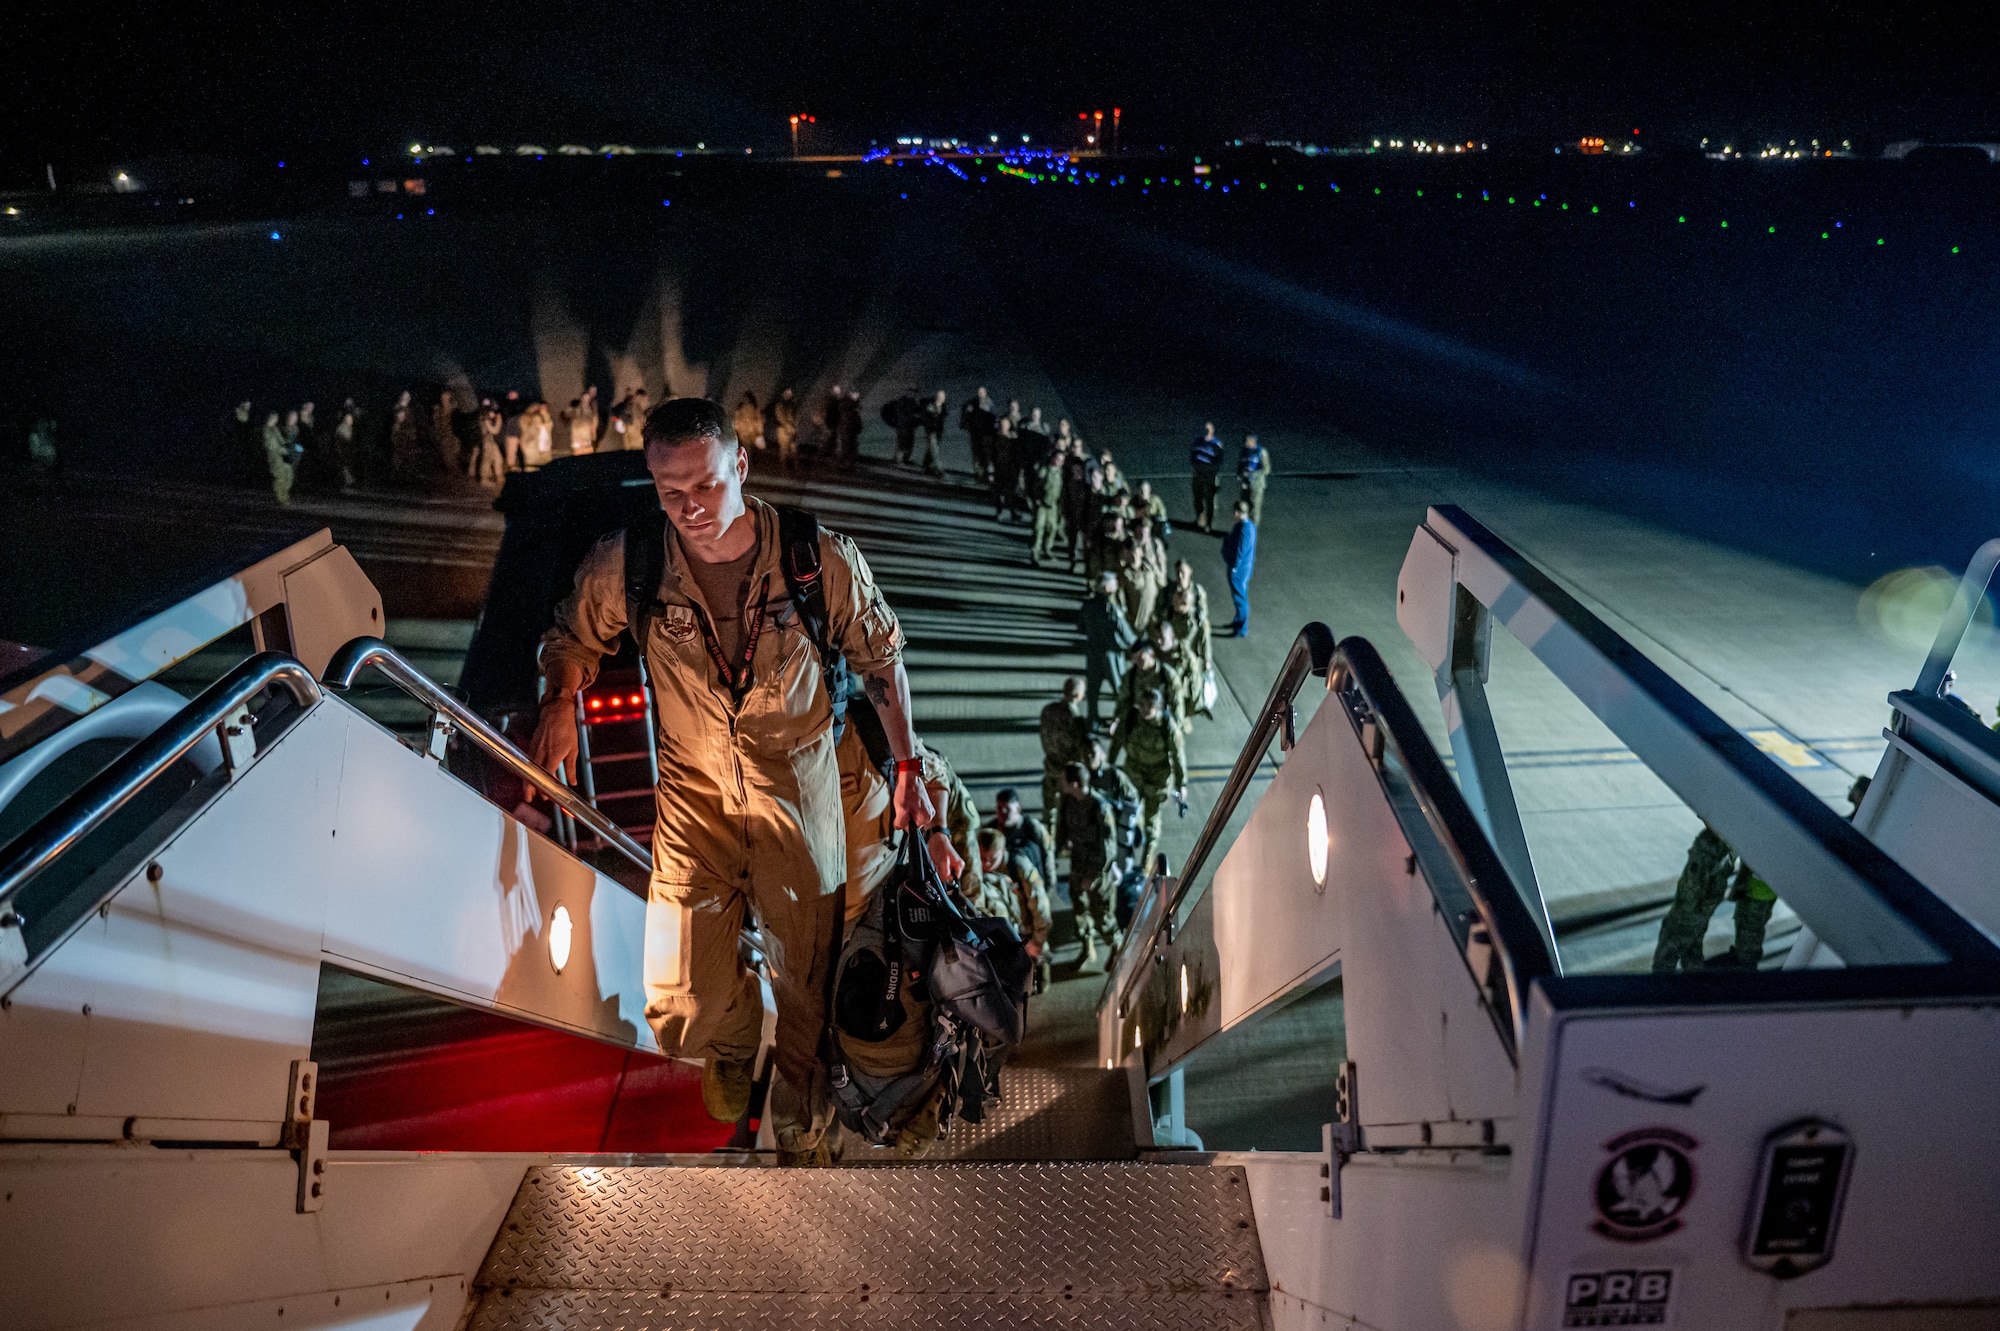 Airmen forming line walking up stairs to board Aircraft